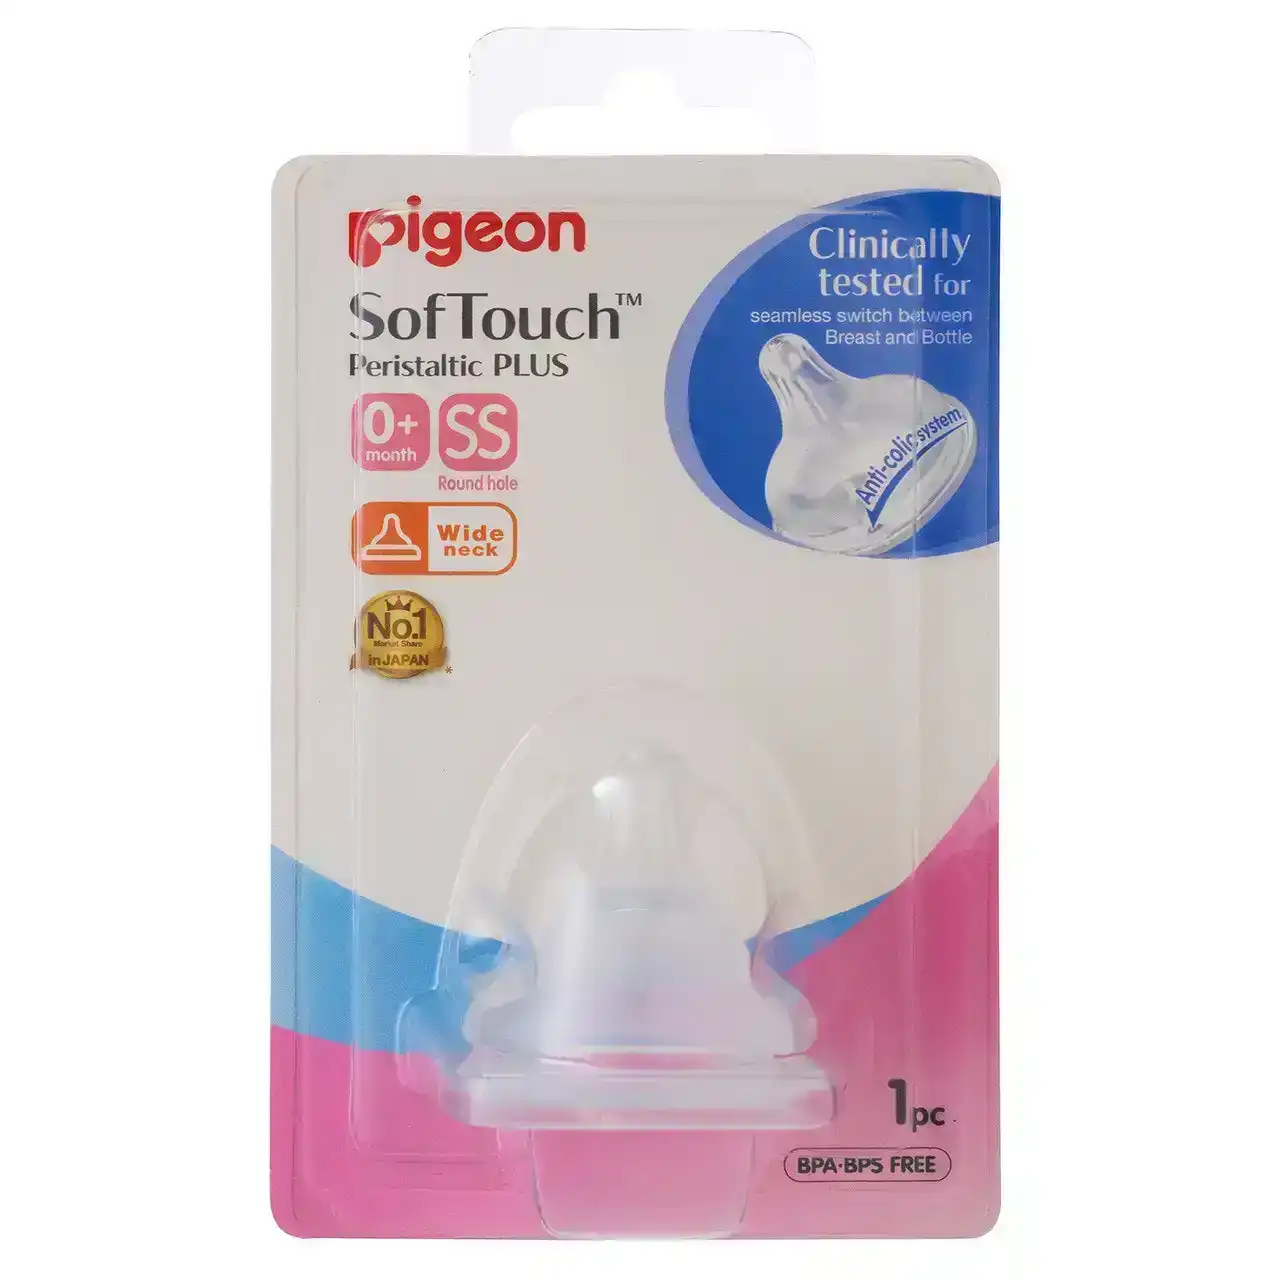 PIGEON Softouch Peristaltic Plus Teat SS 1 Pack